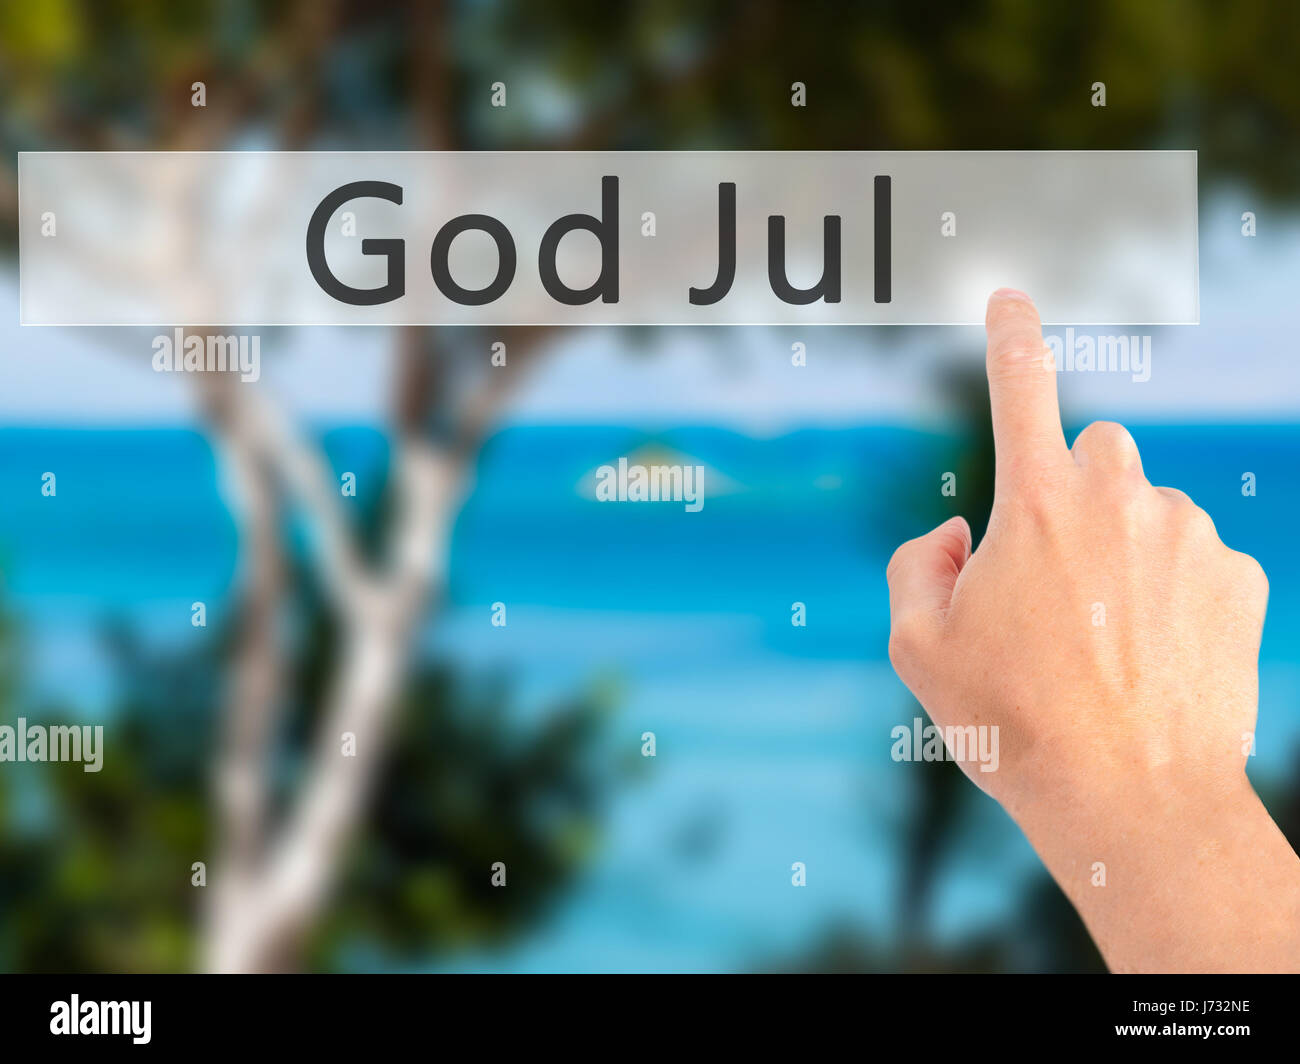 God Jul (Merry Christmas in Swedish) - Hand pressing a button on blurred background concept . Business, technology, internet concept. Stock Photo Stock Photo